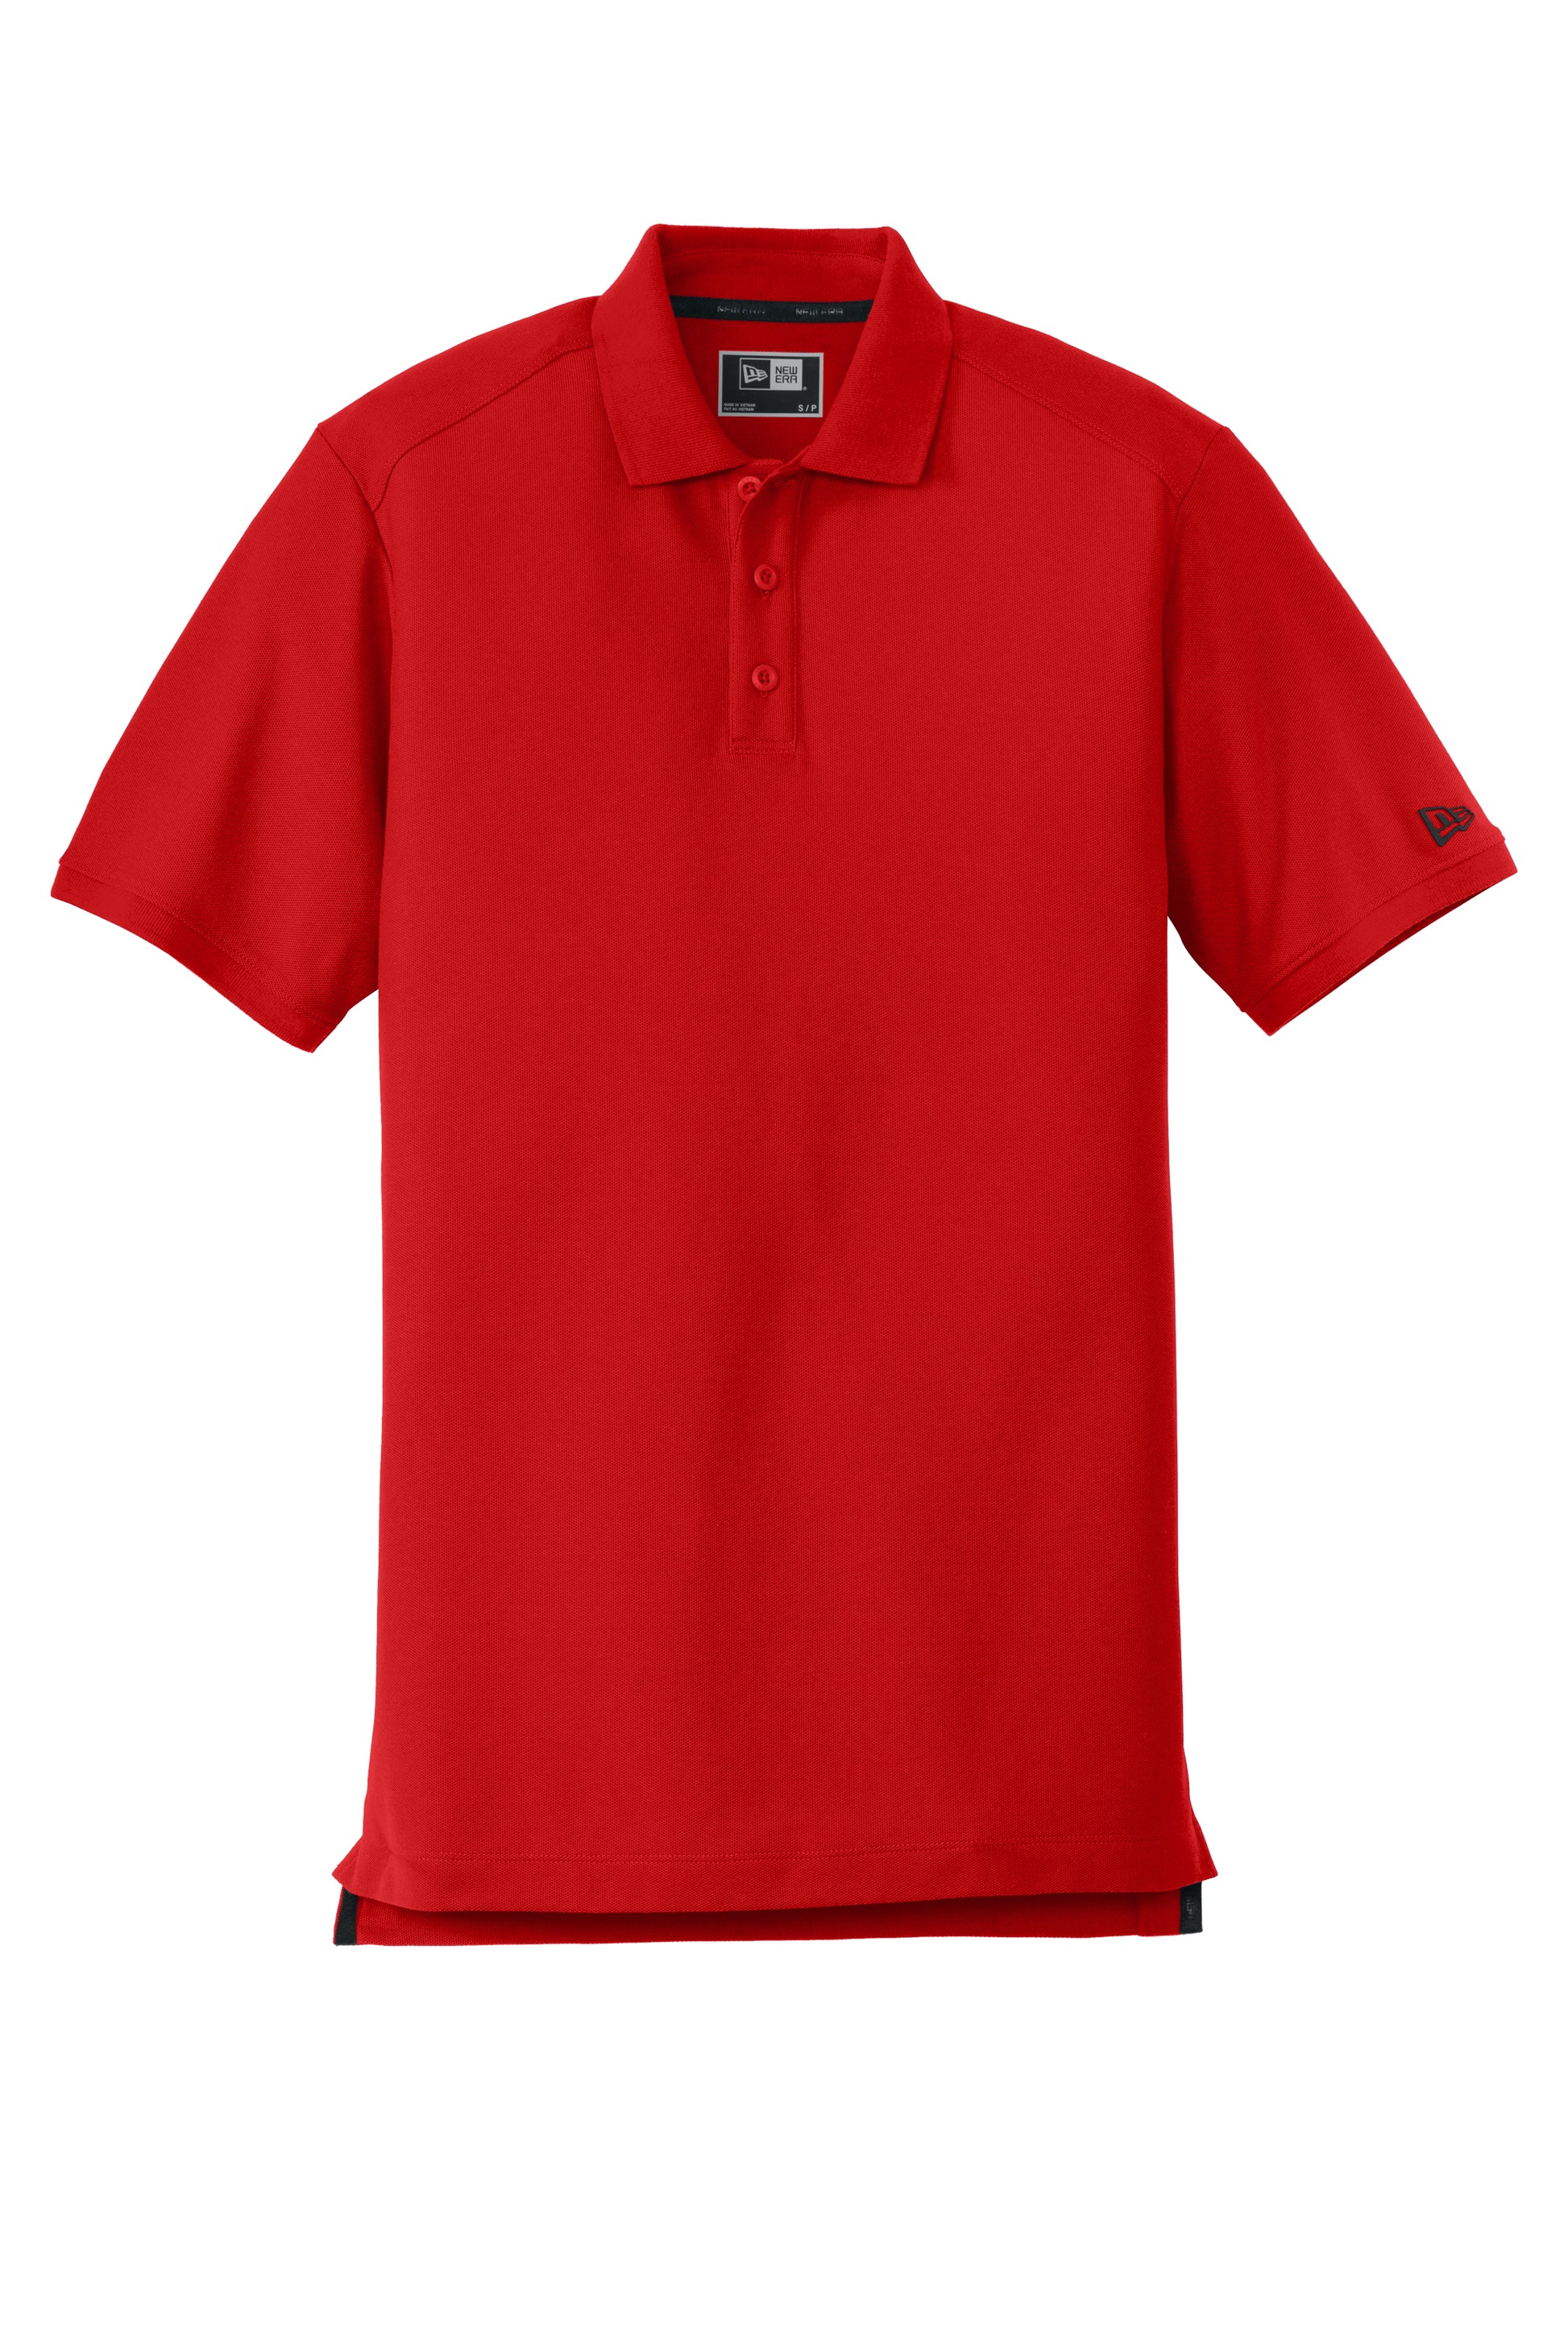 new era venue home plate polo scarlet red